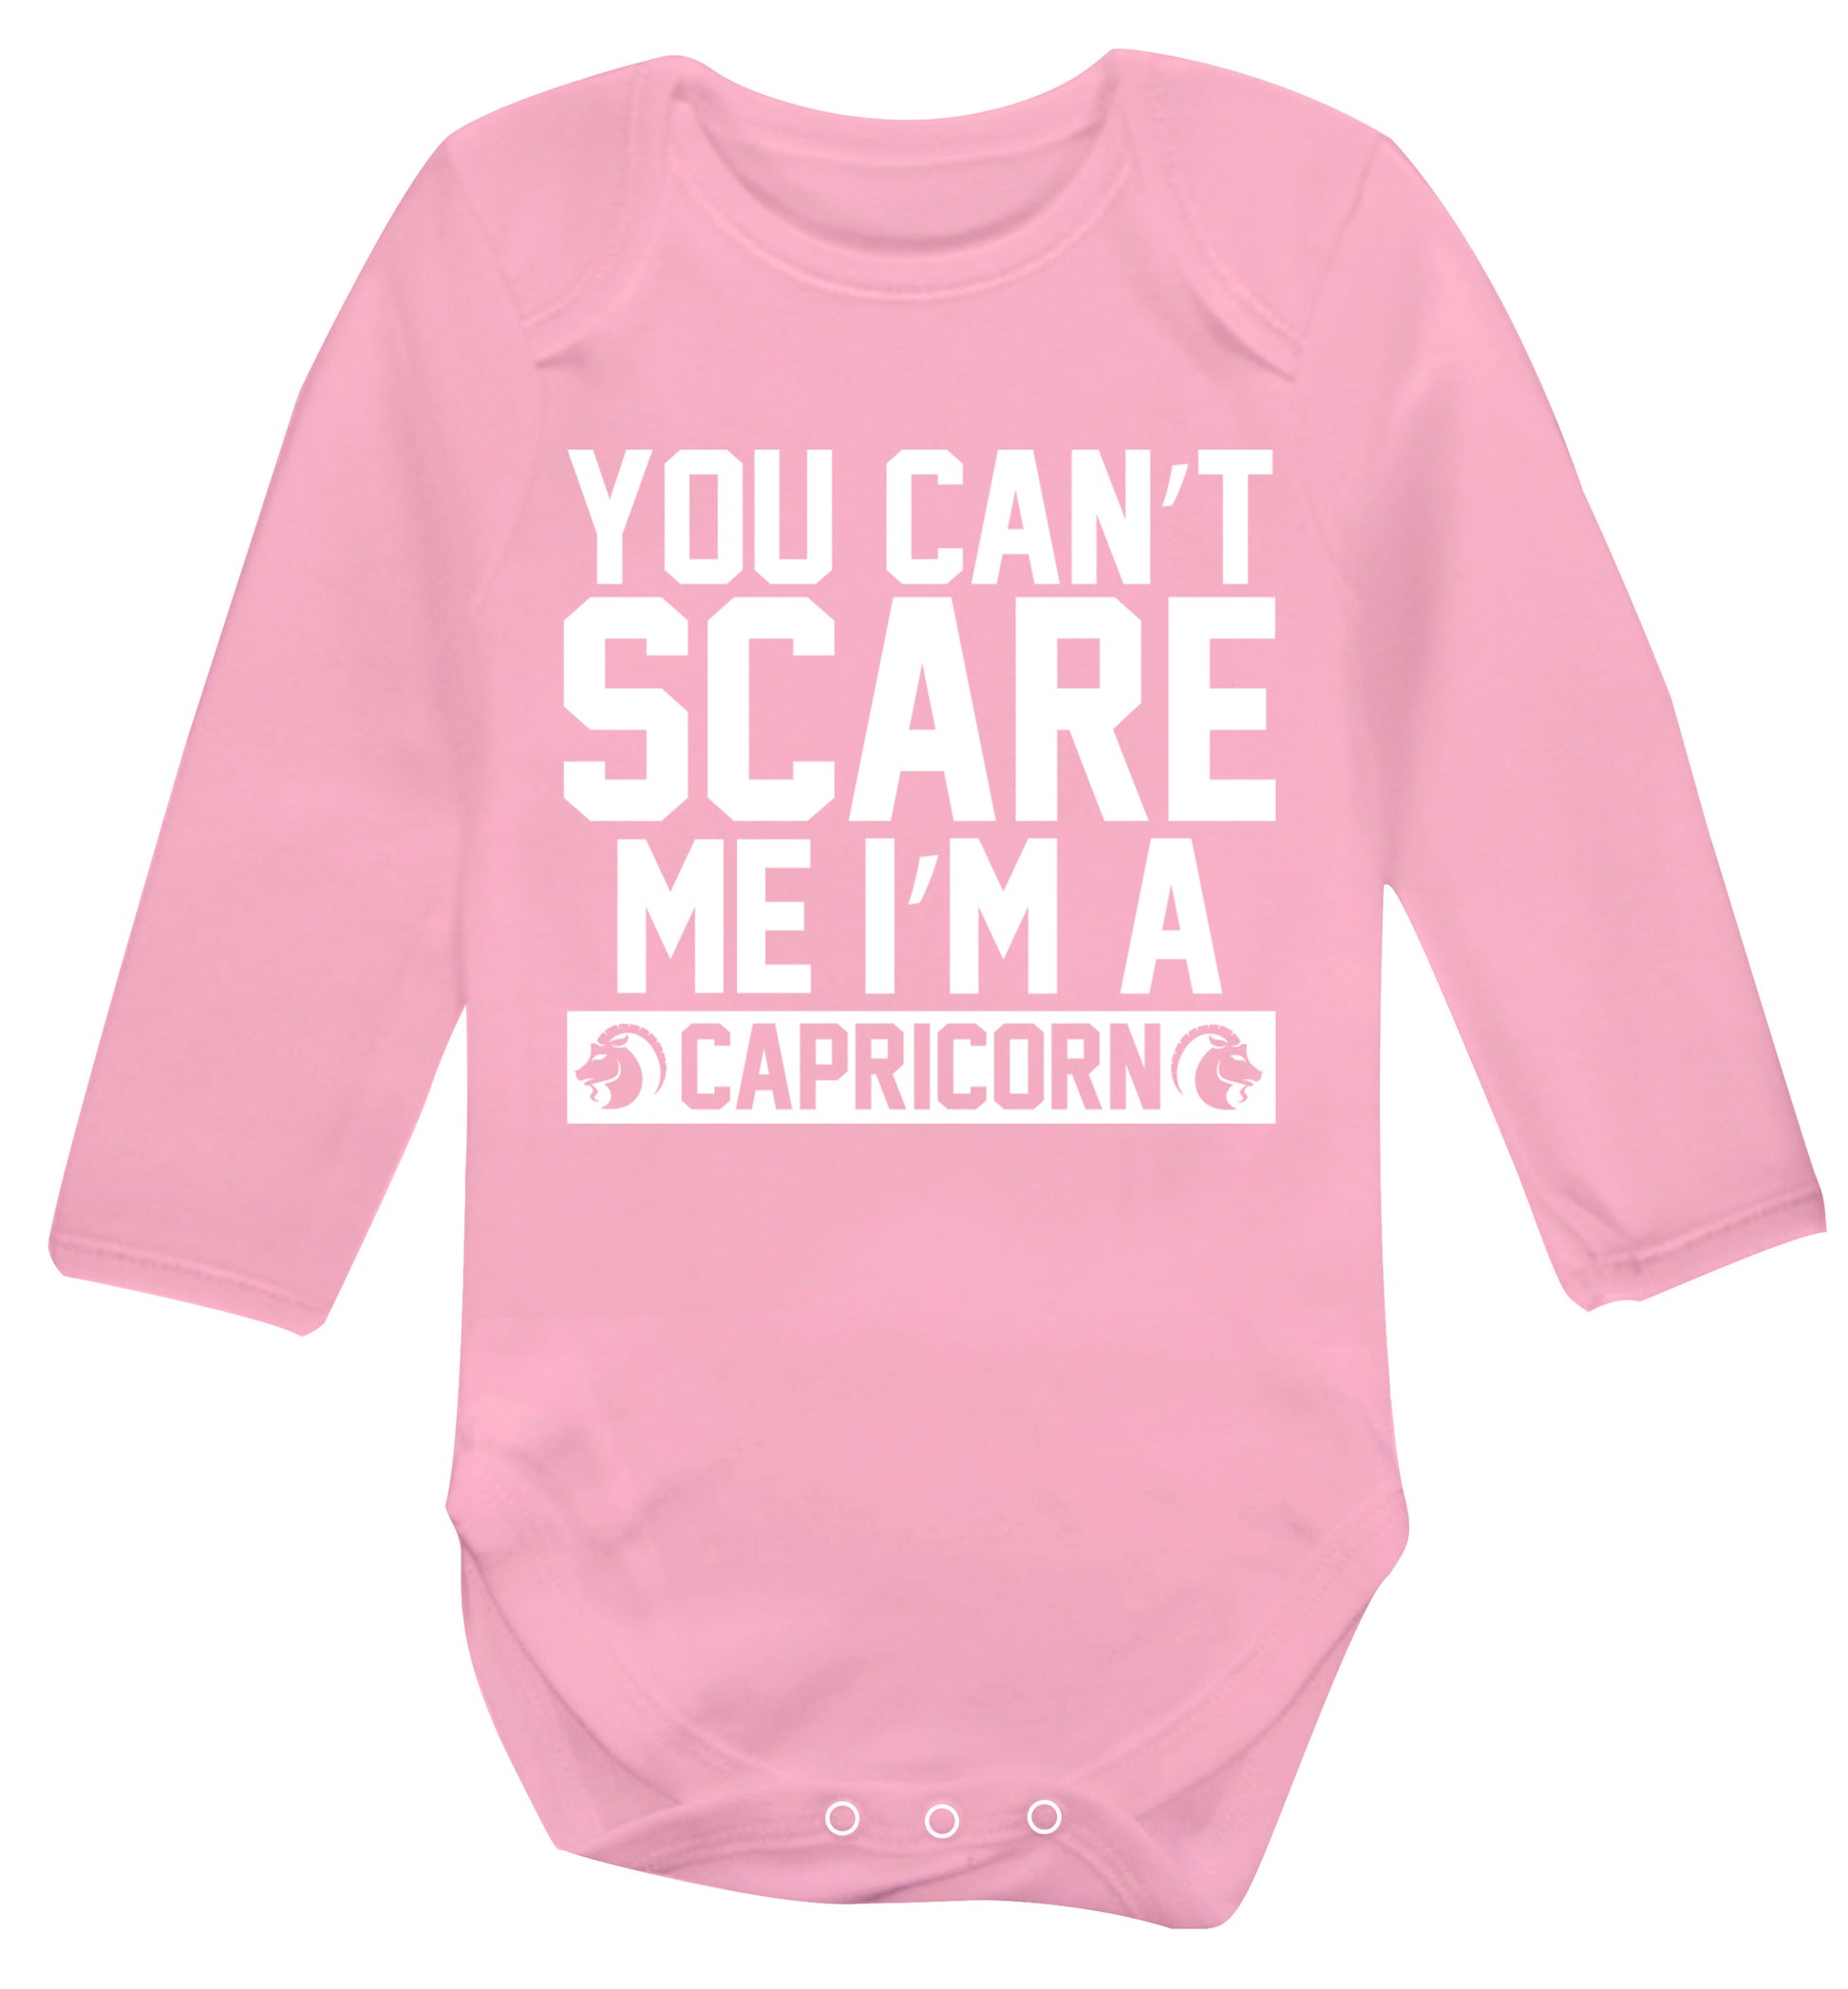 You can't scare me I'm a capricorn Baby Vest long sleeved pale pink 6-12 months